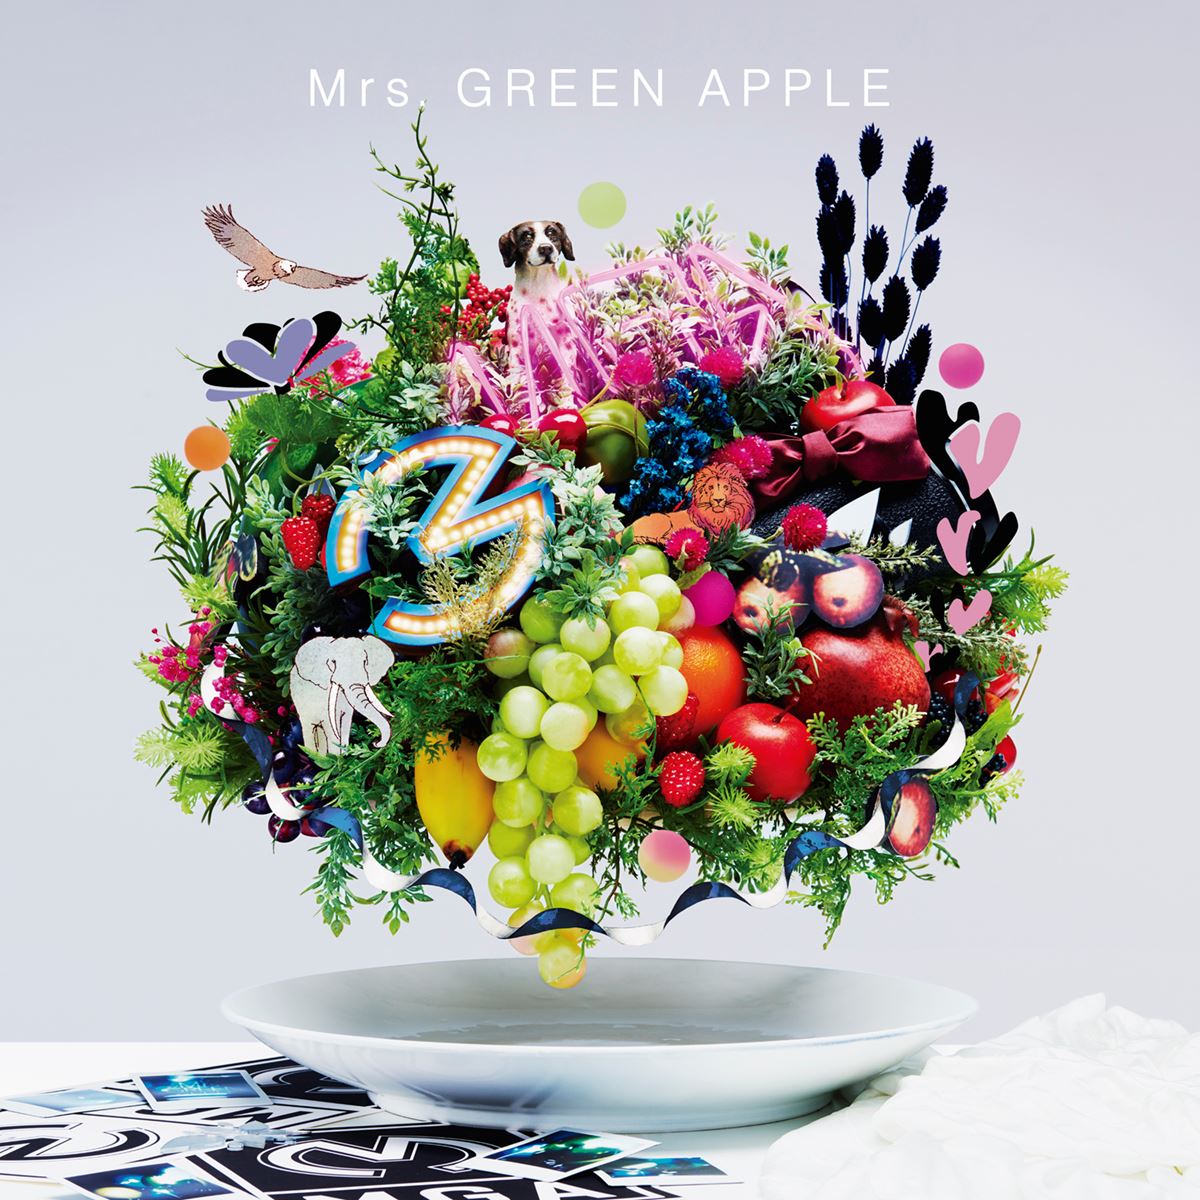 Mrs Green Apple ライブ映像3週連続公開第2弾は Wanted Wanted ぴあエンタメ情報